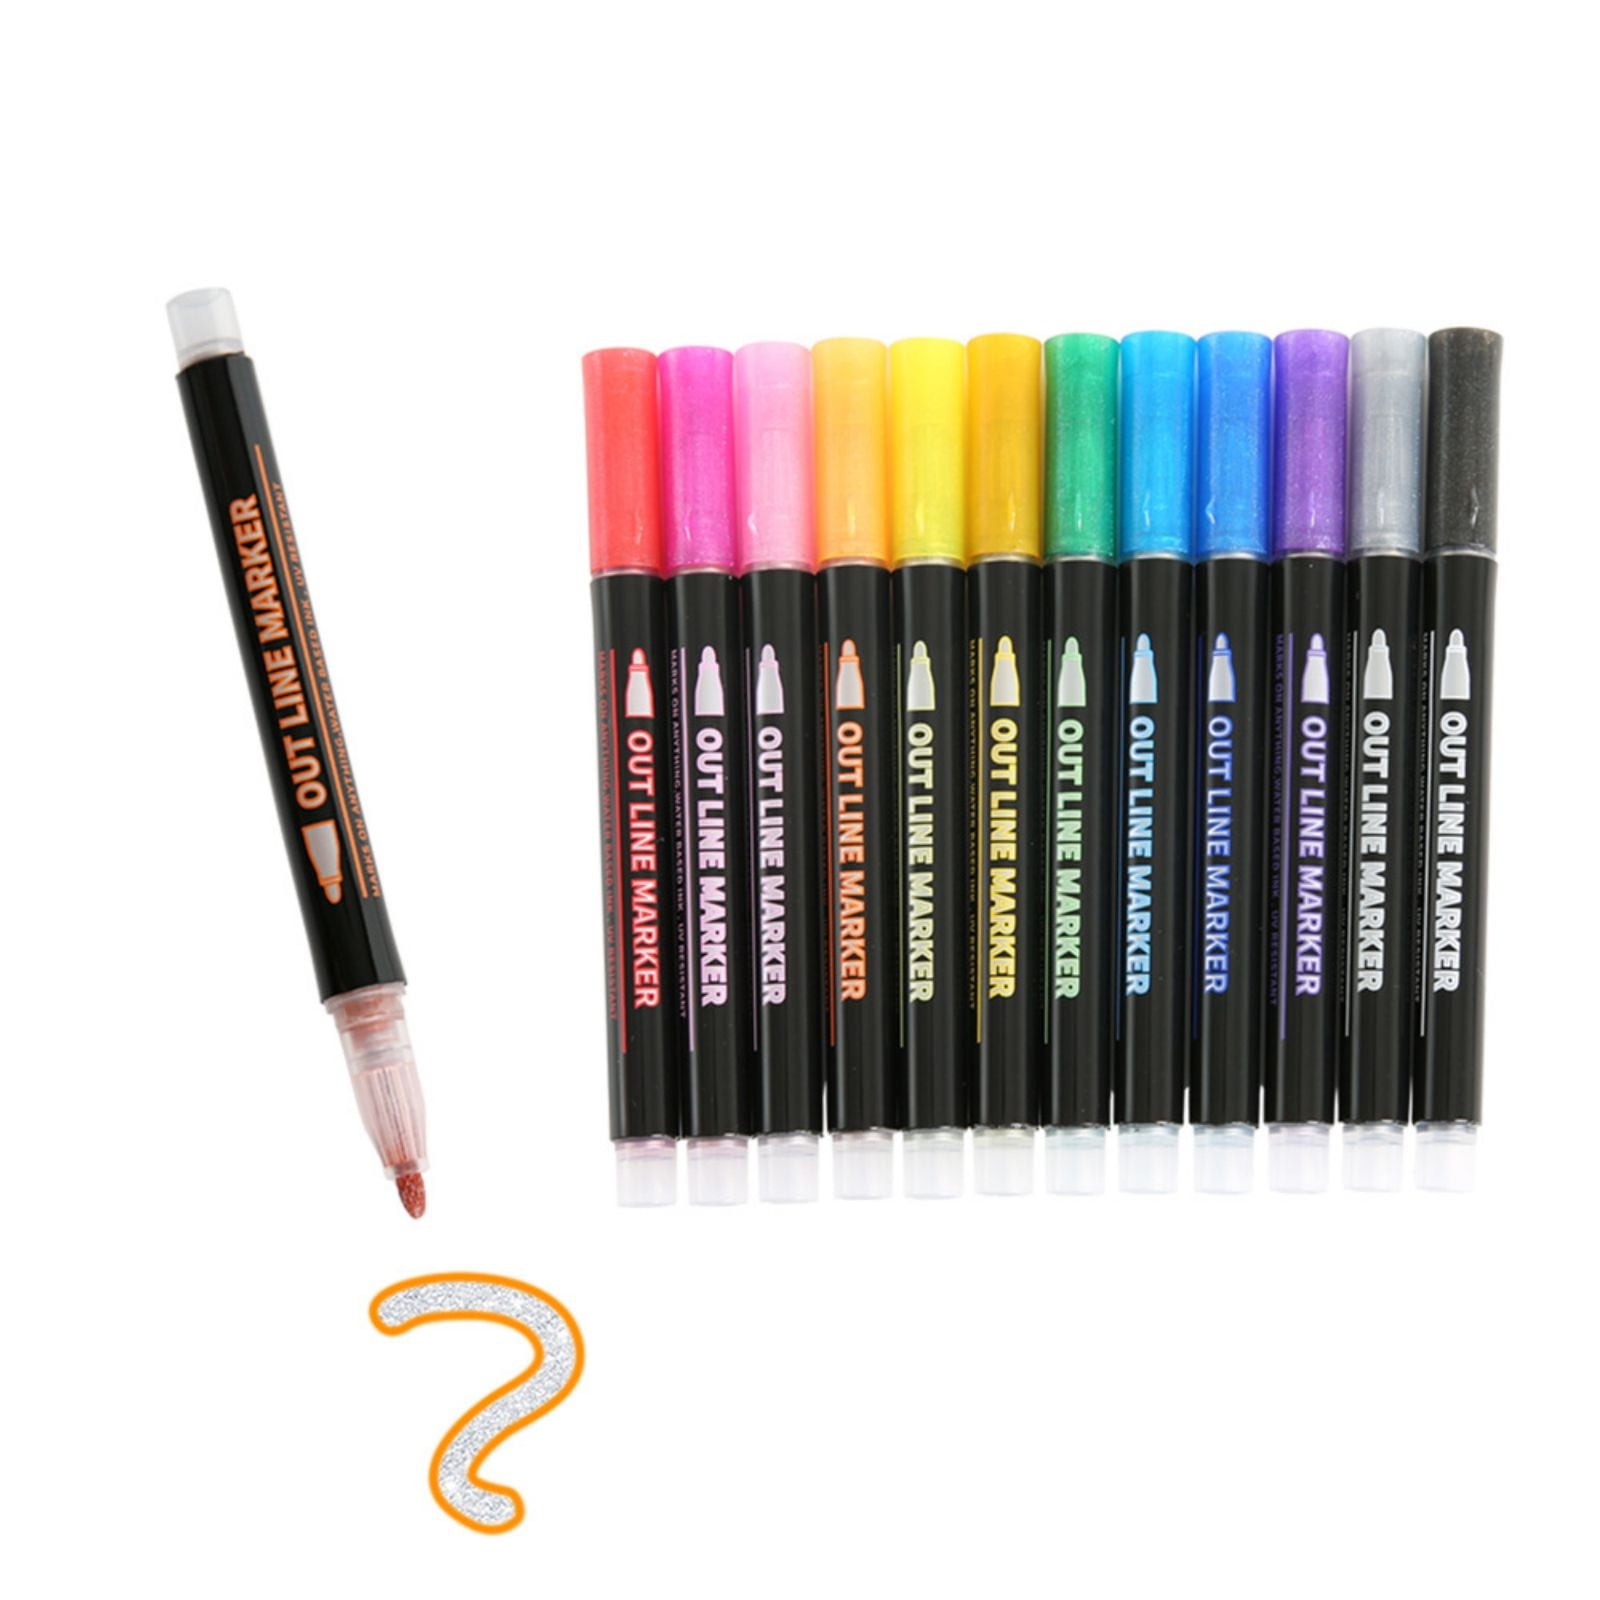 Hotbest 20 Colors Outline Marker Double-Line Shimmer Markers Plastic Self Outline Pens Set Metallic Markers DIY Art Craft for Gift Card Making Drawing